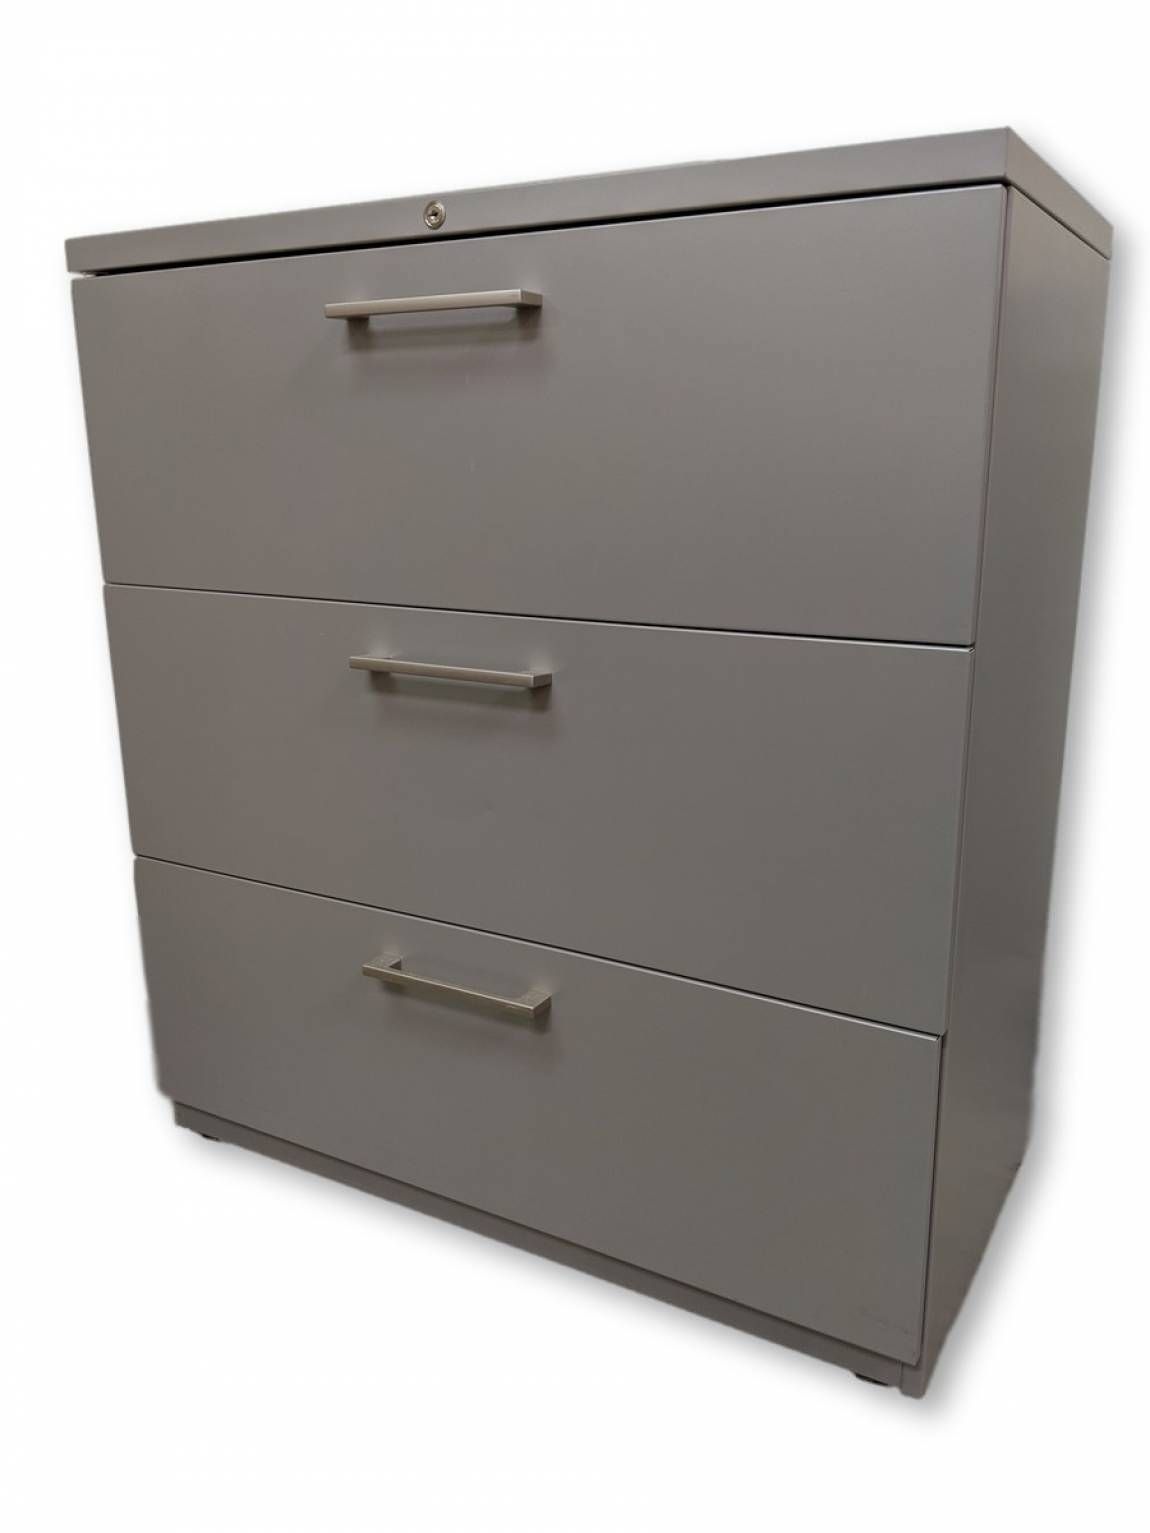 Haworth 3 Drawer Lateral Filing Cabinet - 36 Inch Wide